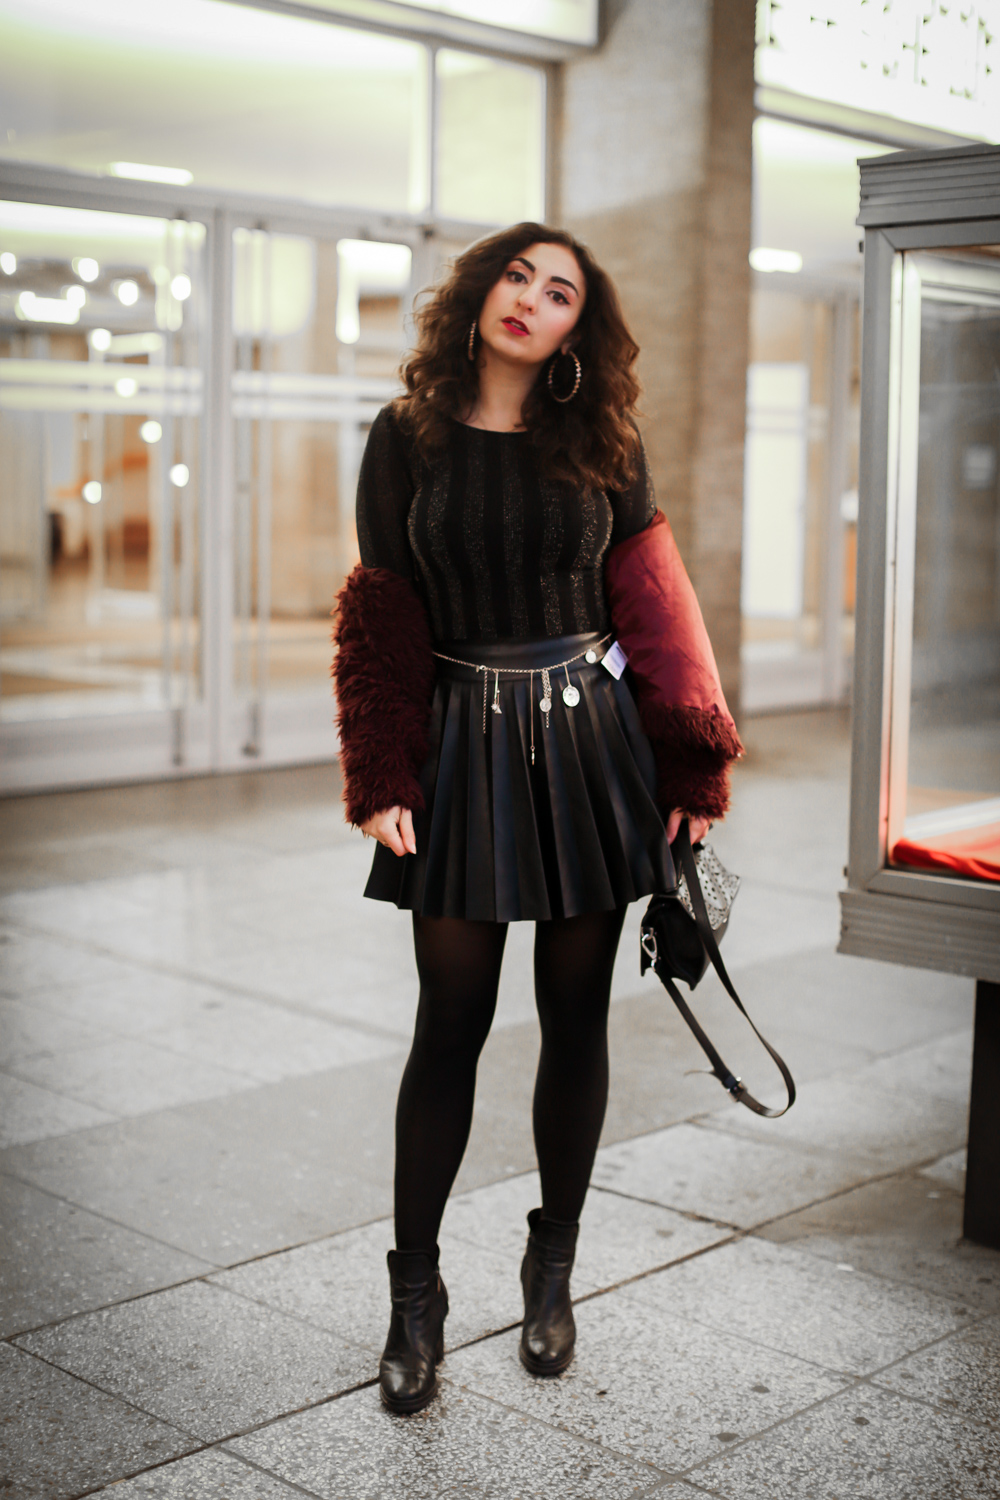 new years eve outfit nye style silvester winter look streetstyle fashion modeblog berlin blog samieze